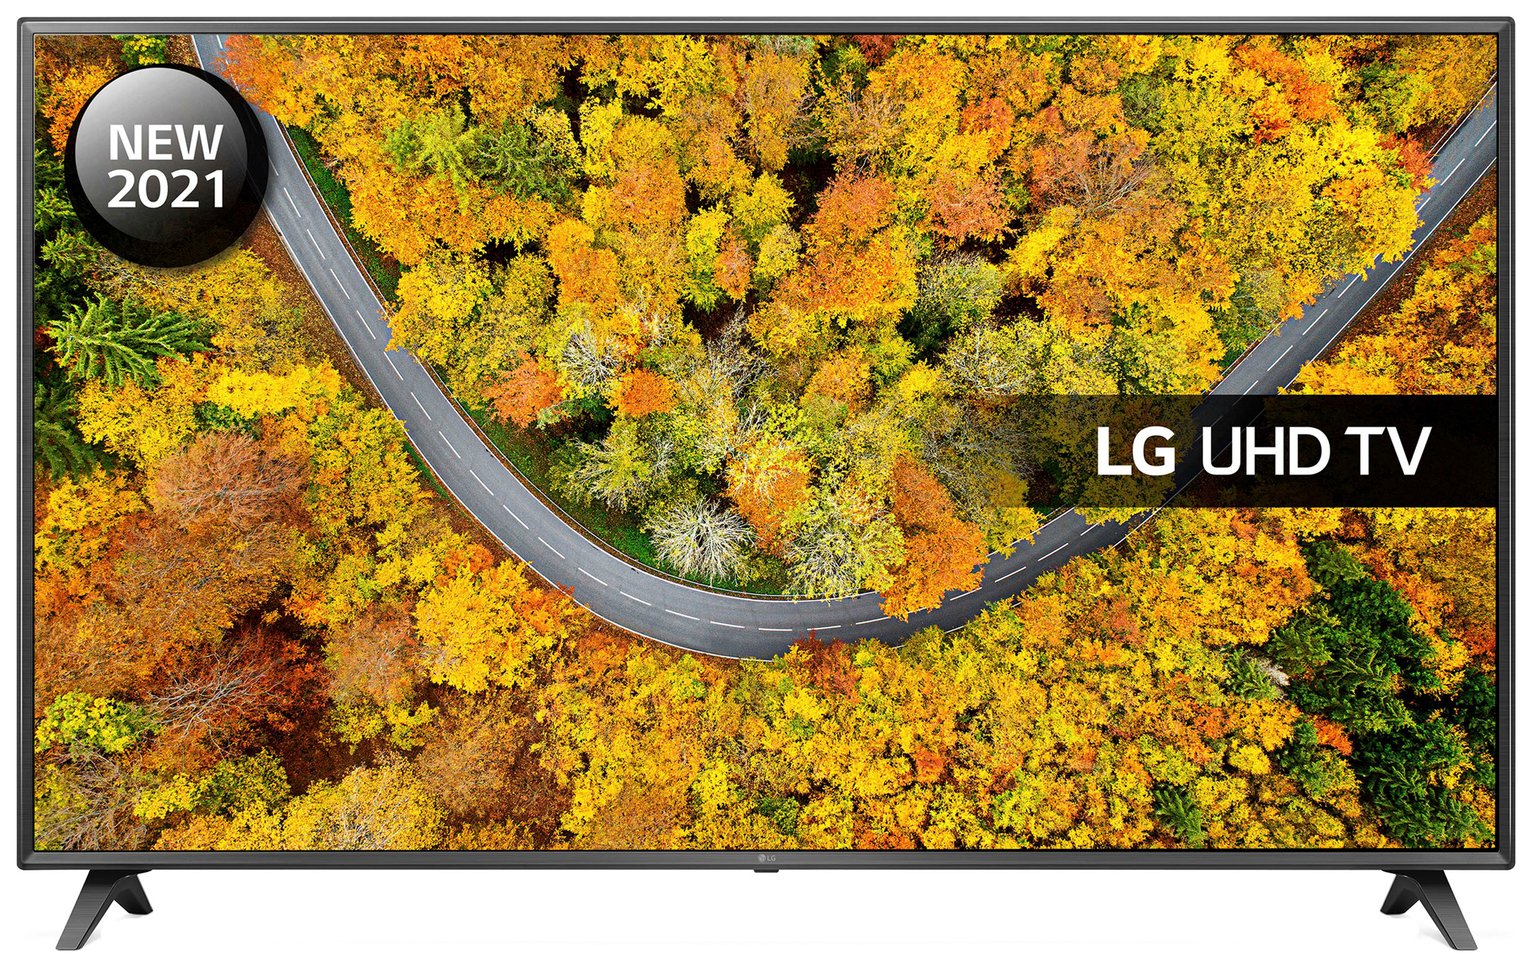 LG 55 Inch 55UP75006LF Smart 4K UHD HDR LED Freeview TV